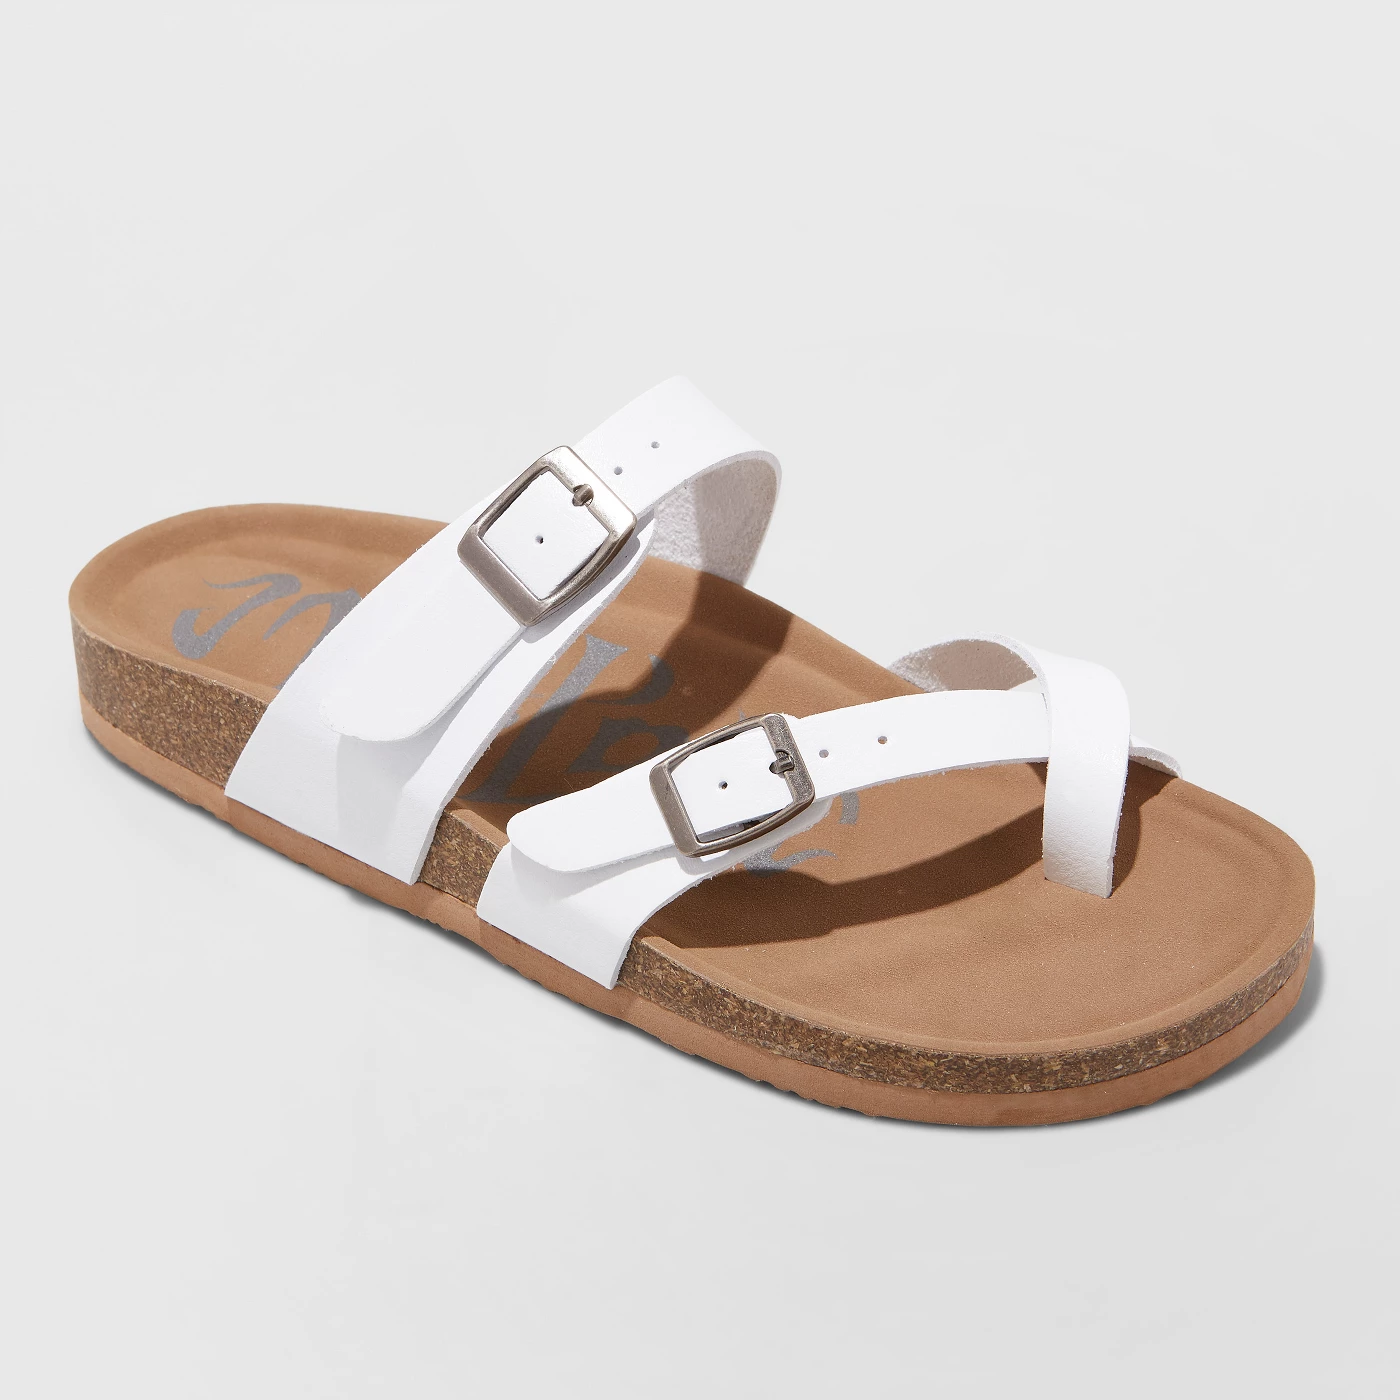 Women's Mad Love Prudence Footbed Sandal - image 1 of 3